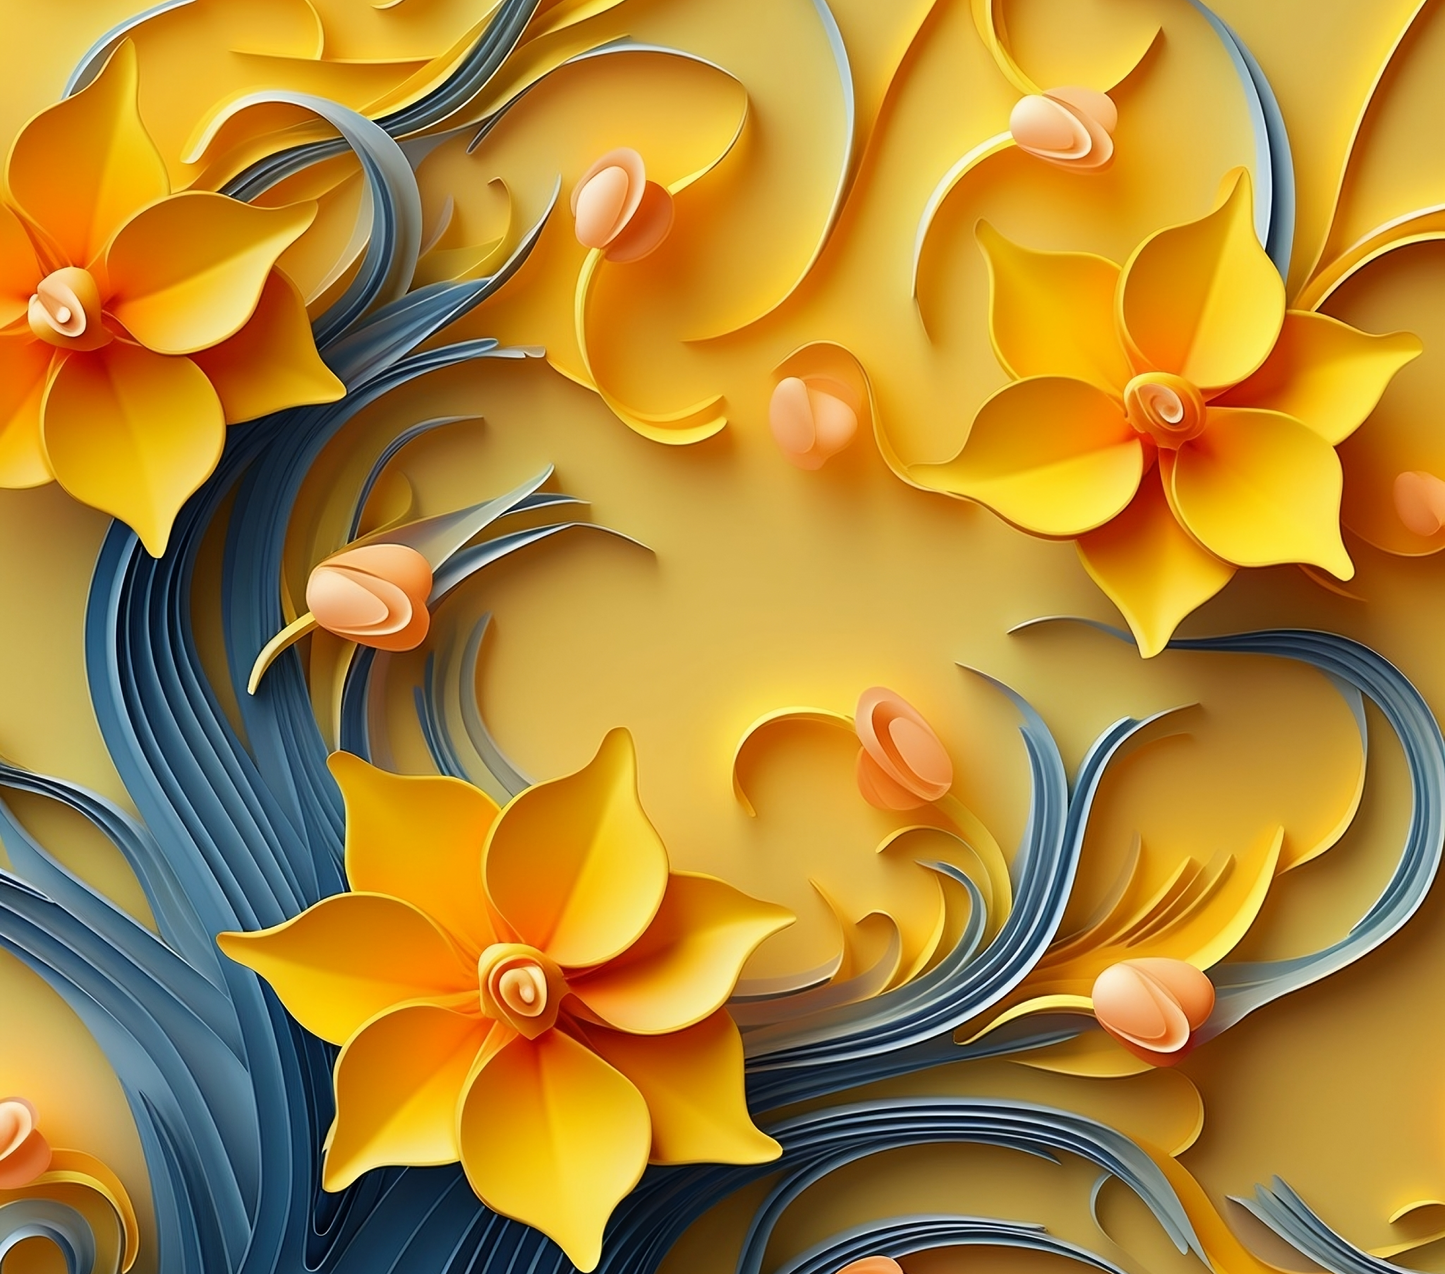 3D YELLOW FLORAL